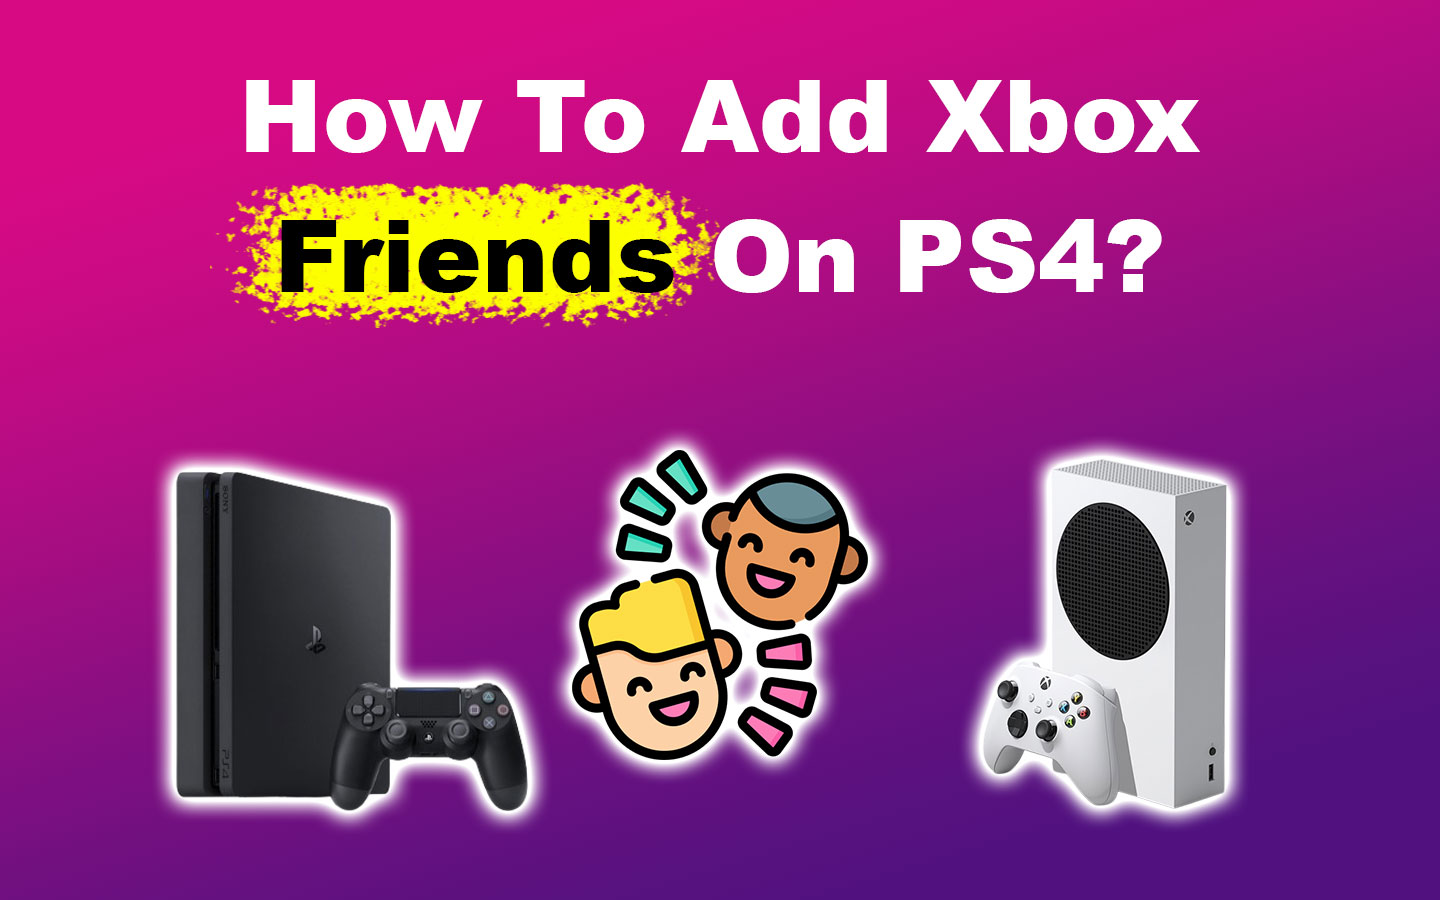 How To Add Xbox Friends On PS4